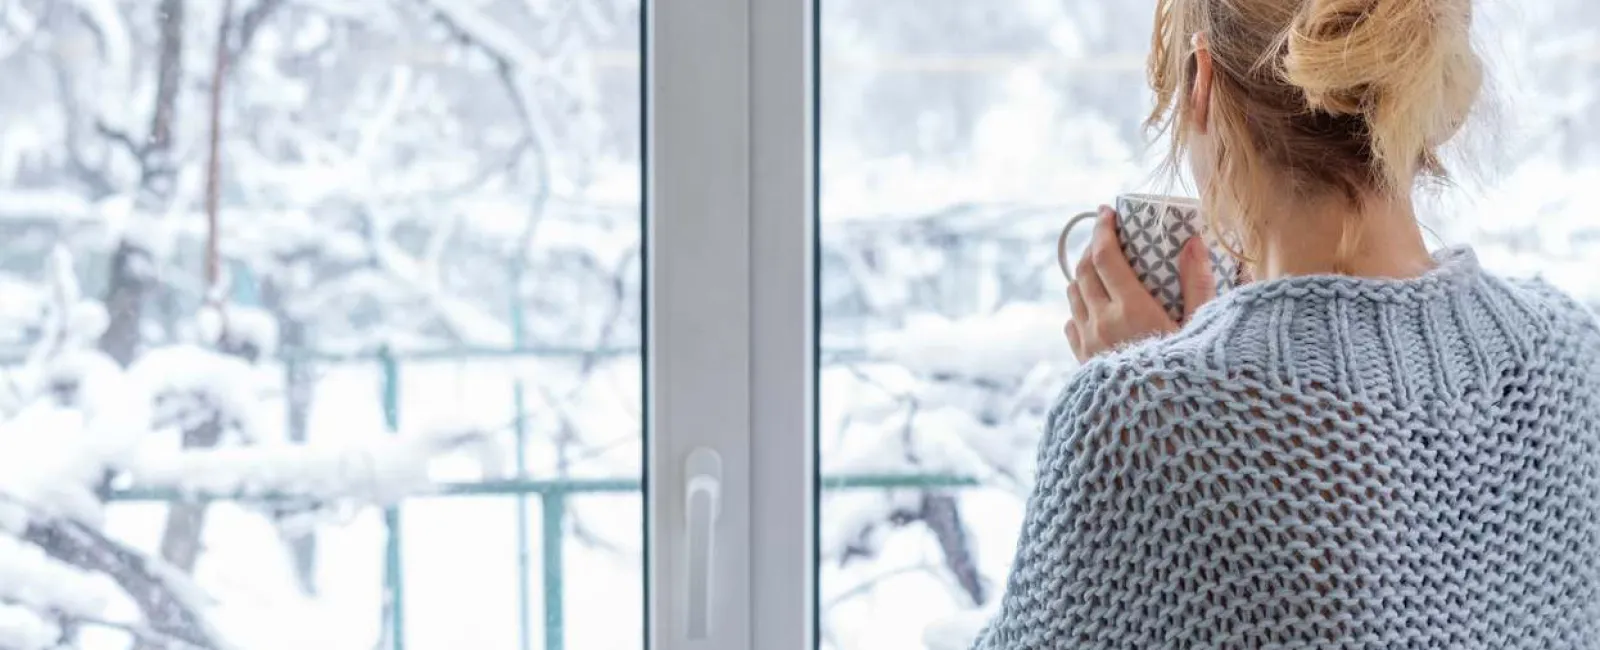 a woman looking out of a window into the snow while holding a cup